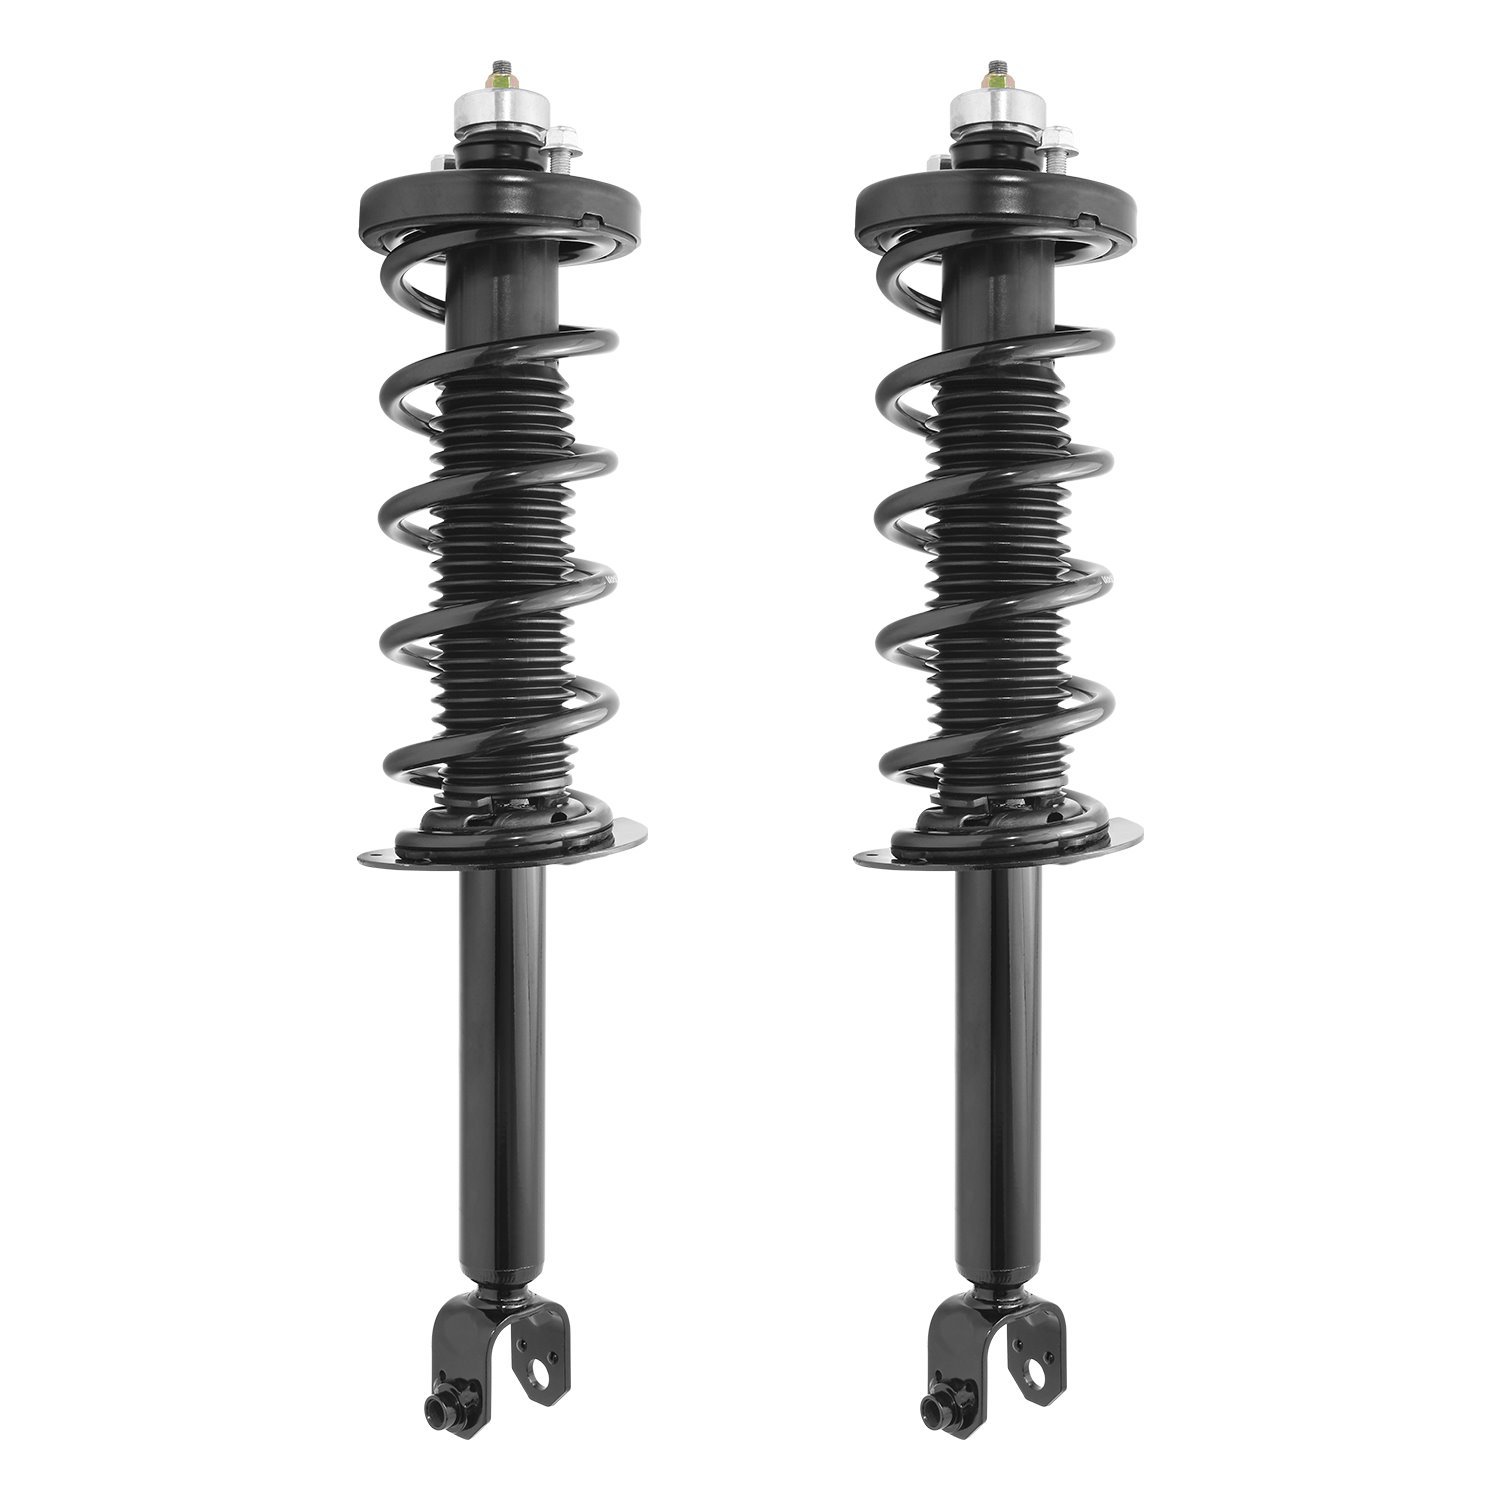 2-15960-001 Suspension Strut & Coil Spring Assembly Set Fits Select Honda Accord